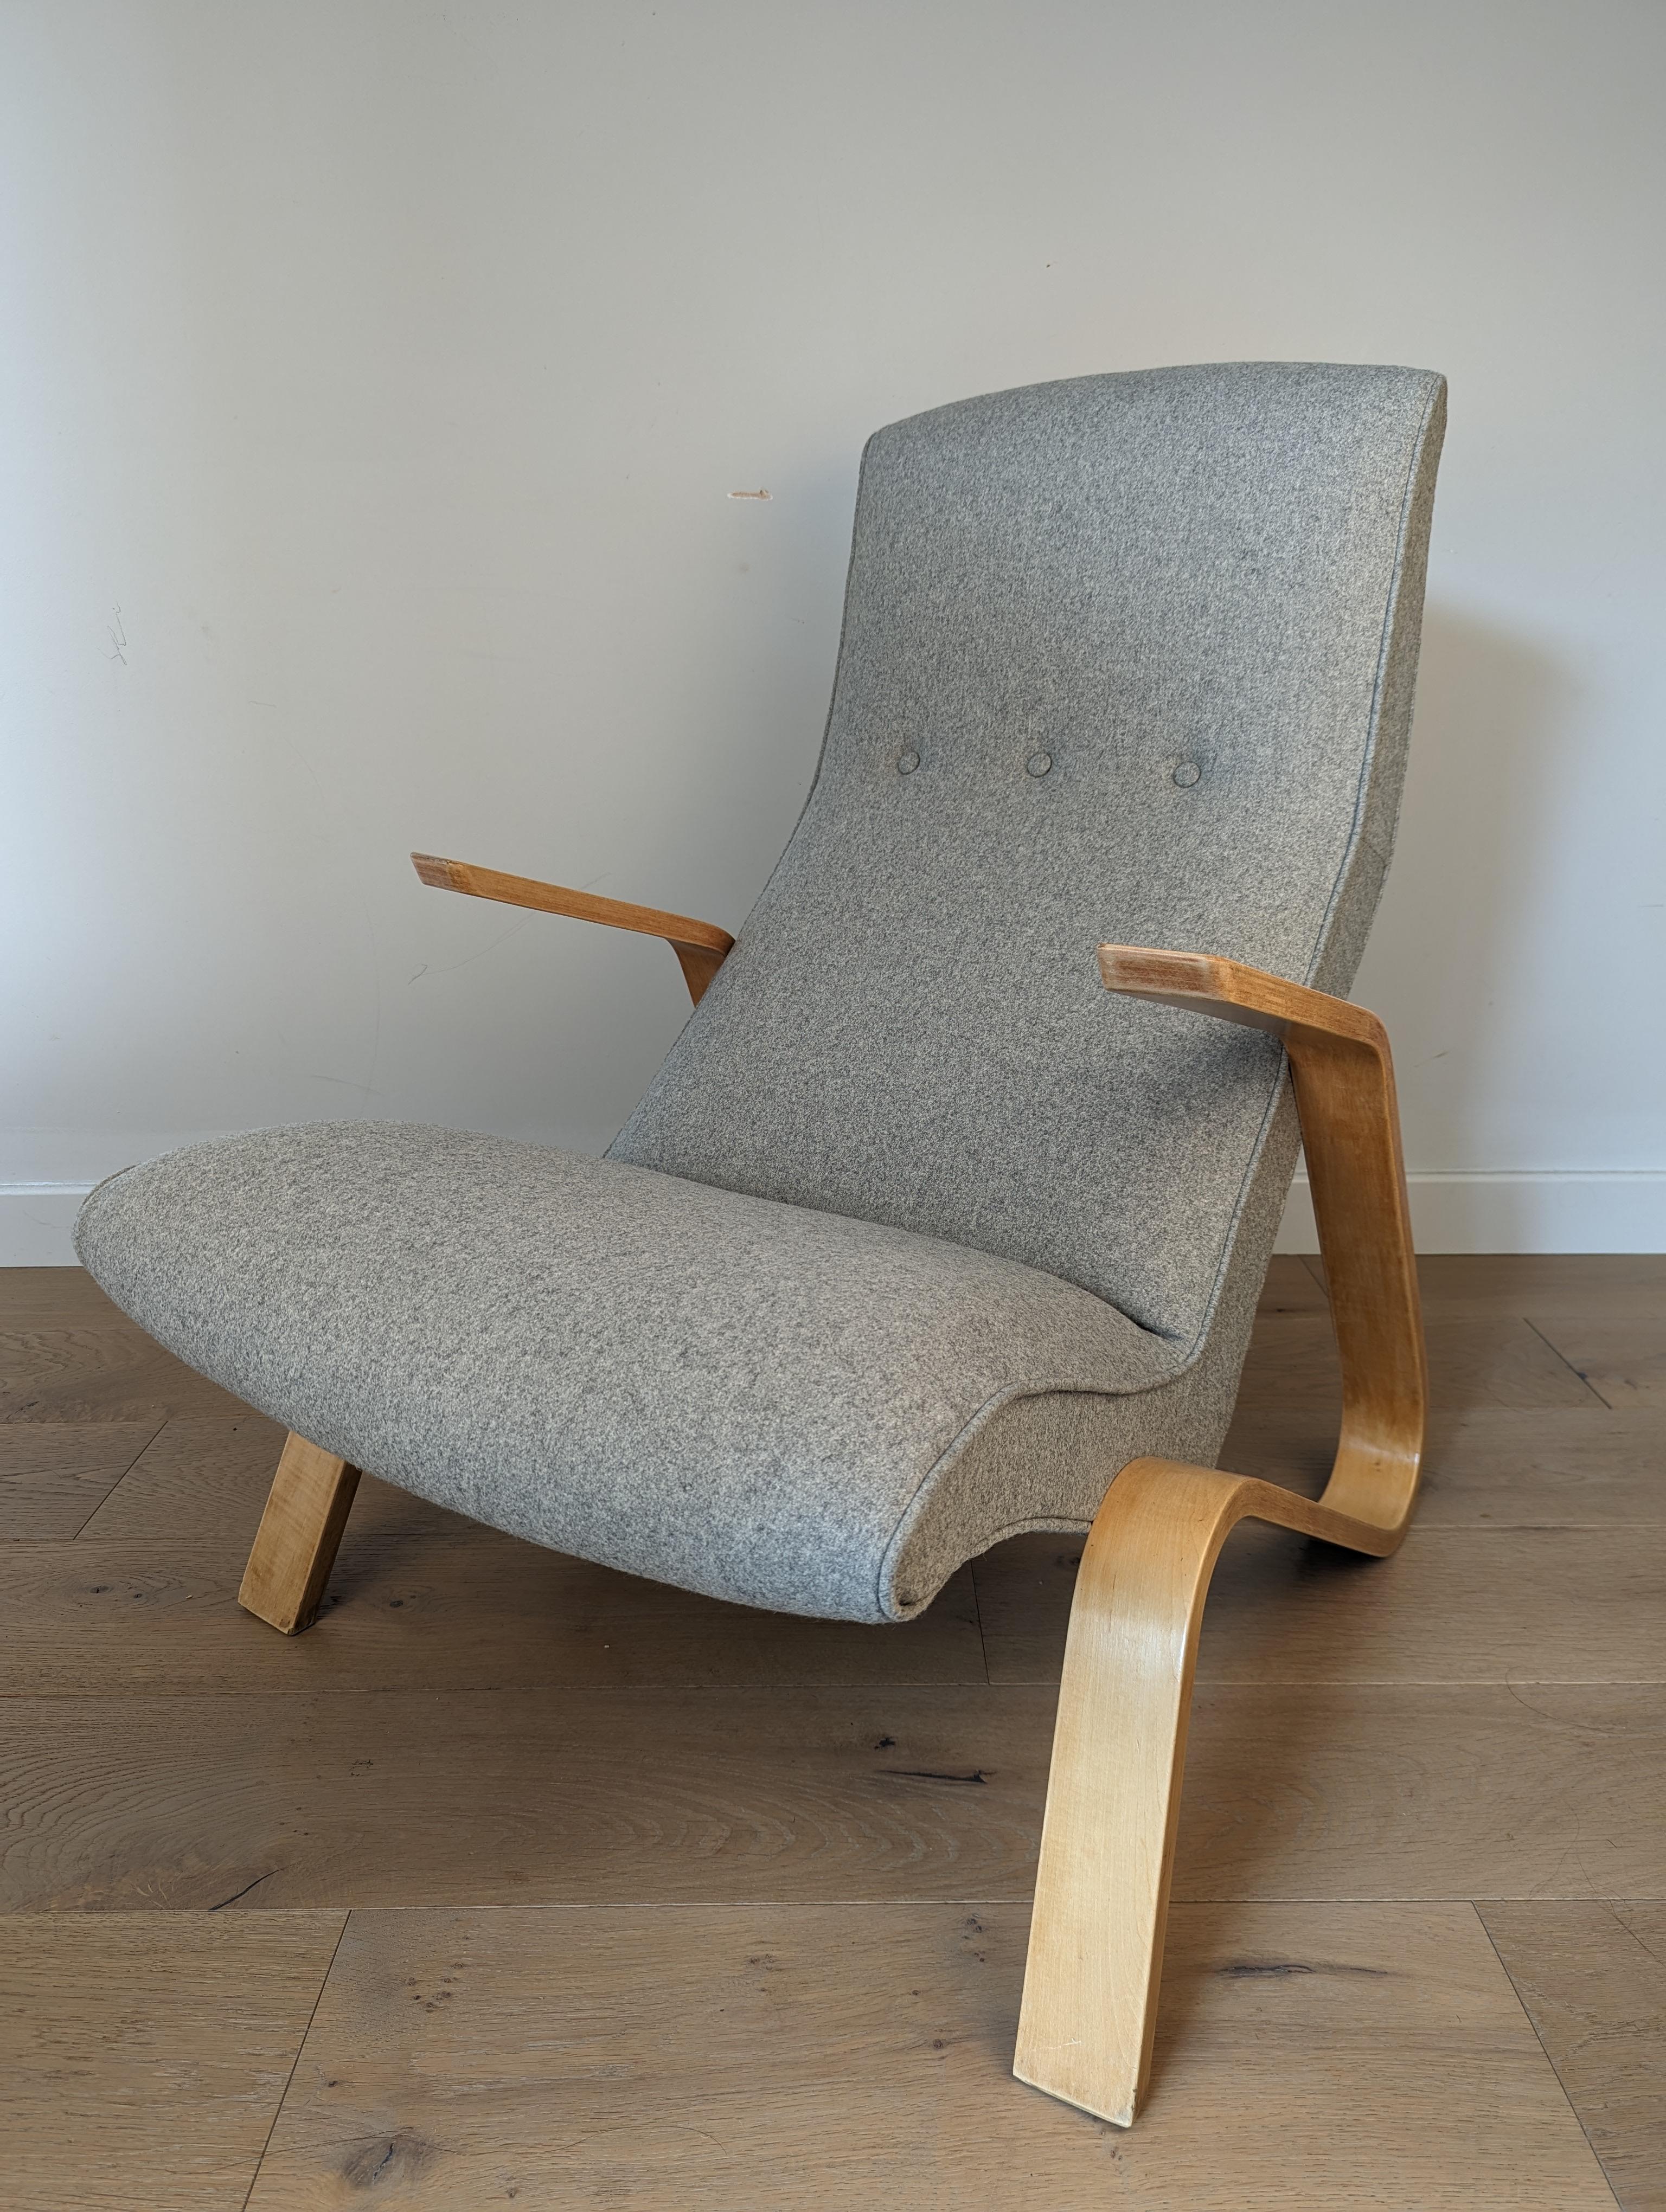 20th Century Mid-century Grasshopper chair by Eero Saarinen for Knoll (1950s) For Sale